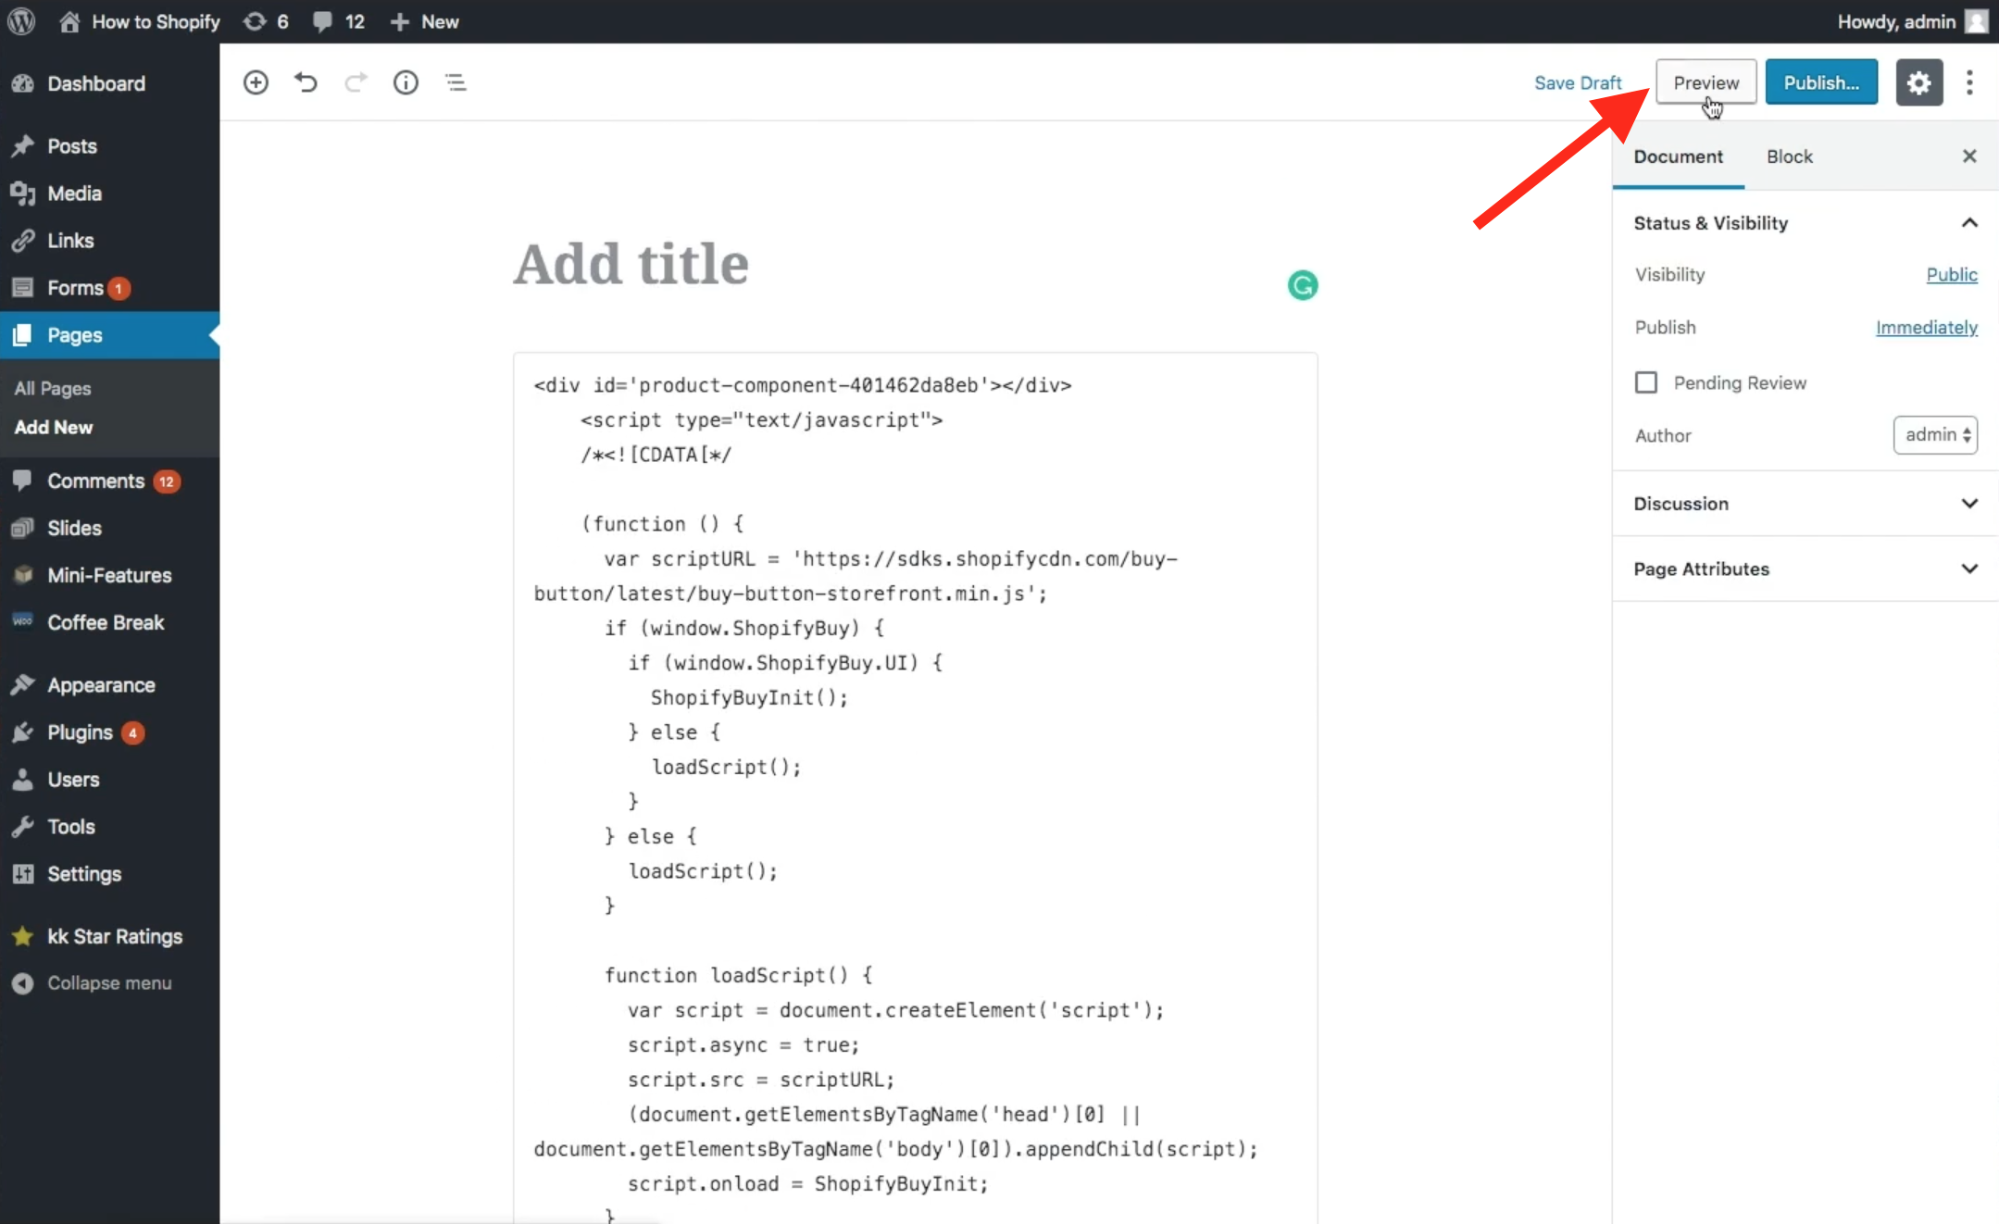 Paste the Shopify Buy Button code into the text field and click Preview to see the changes.